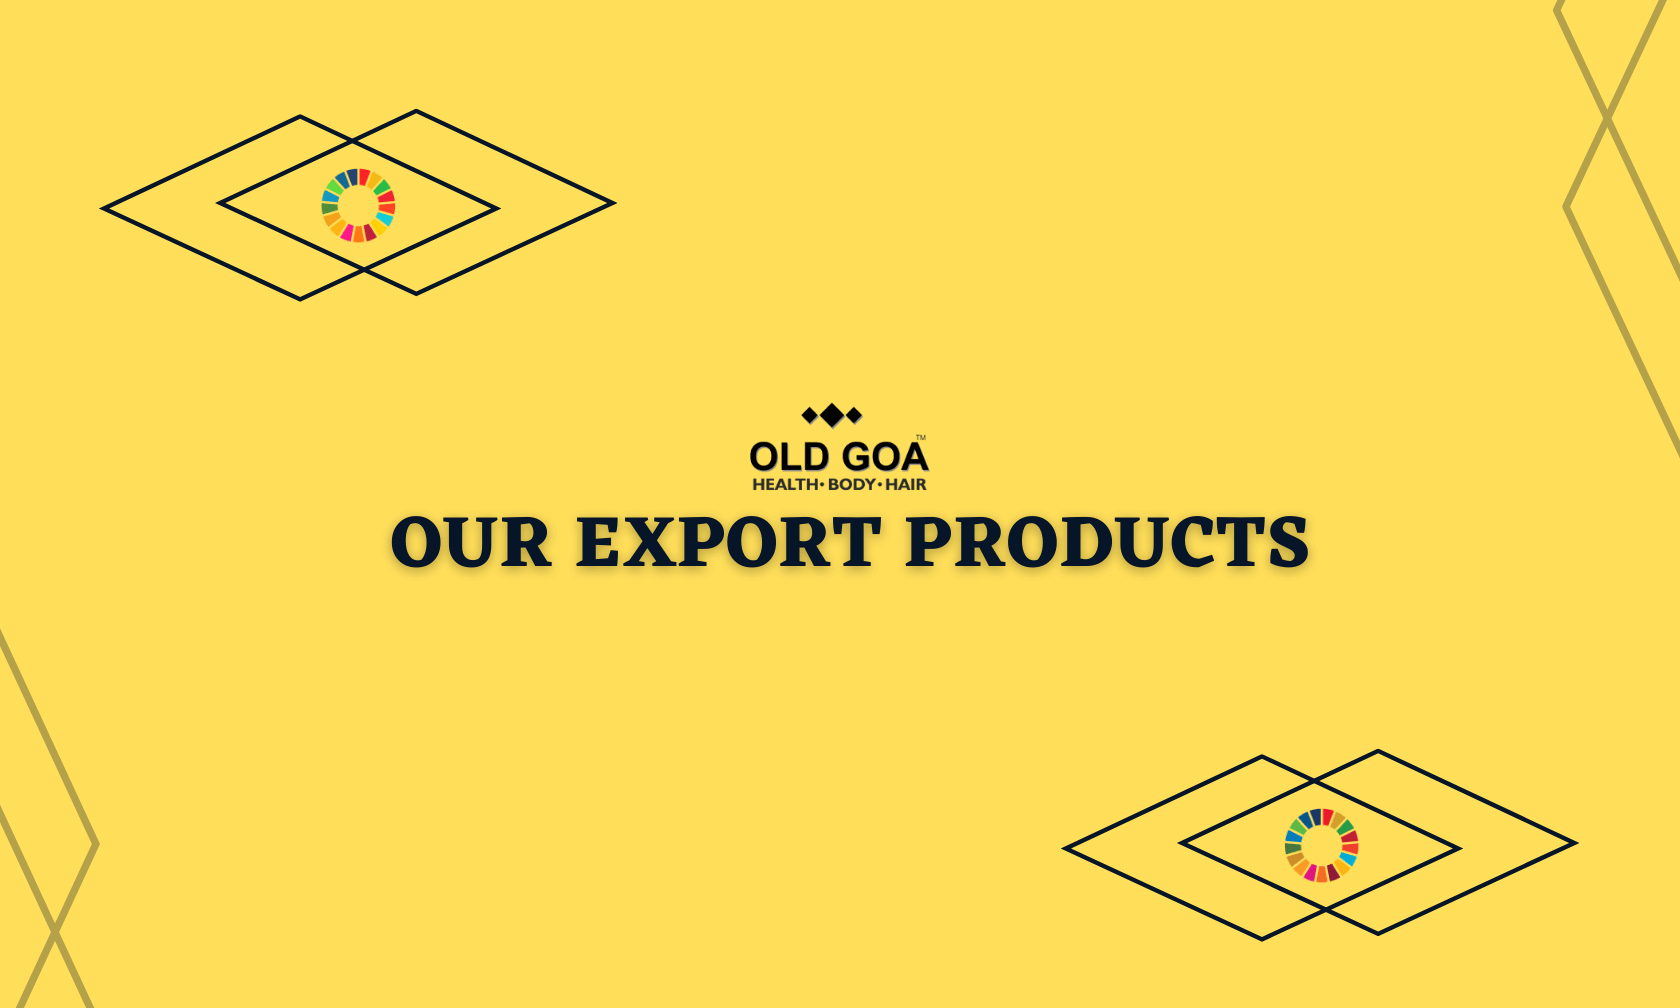 OUR EXPORT PRODUCTS